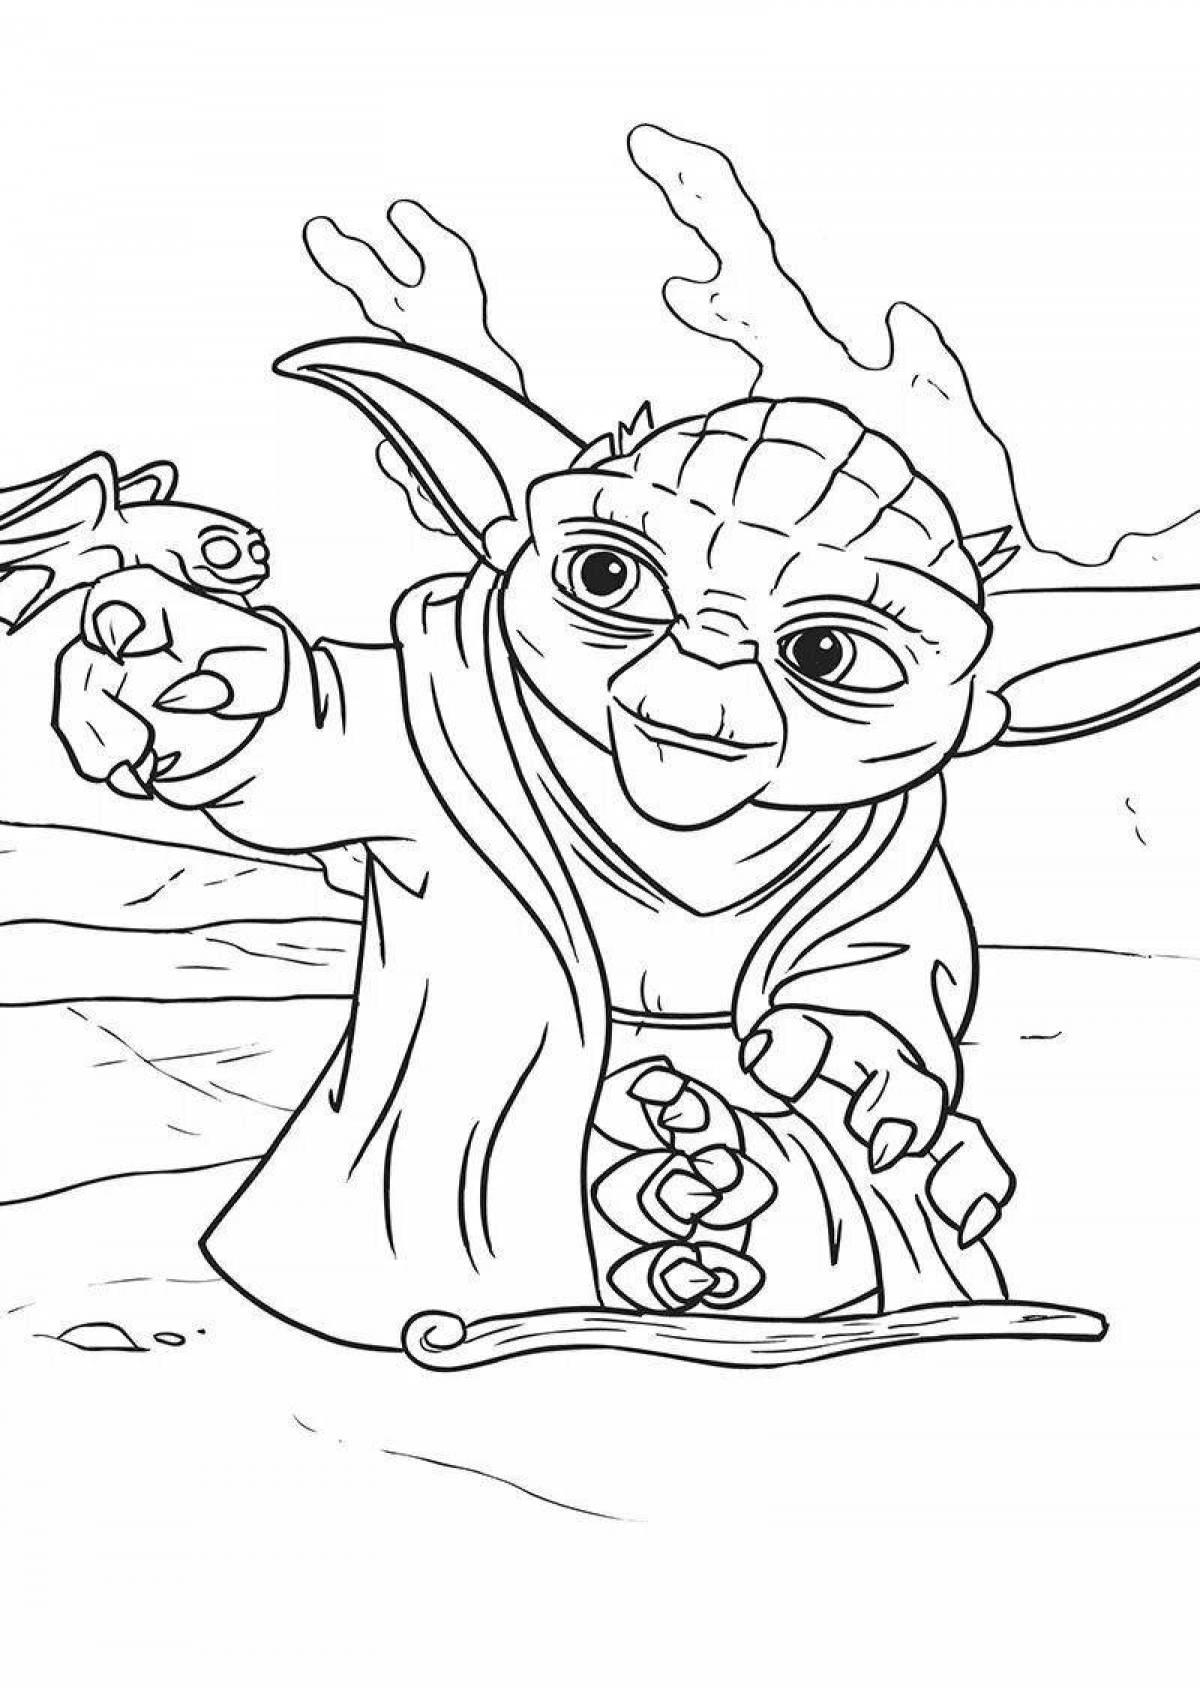 Yoda's brightly colored coloring page